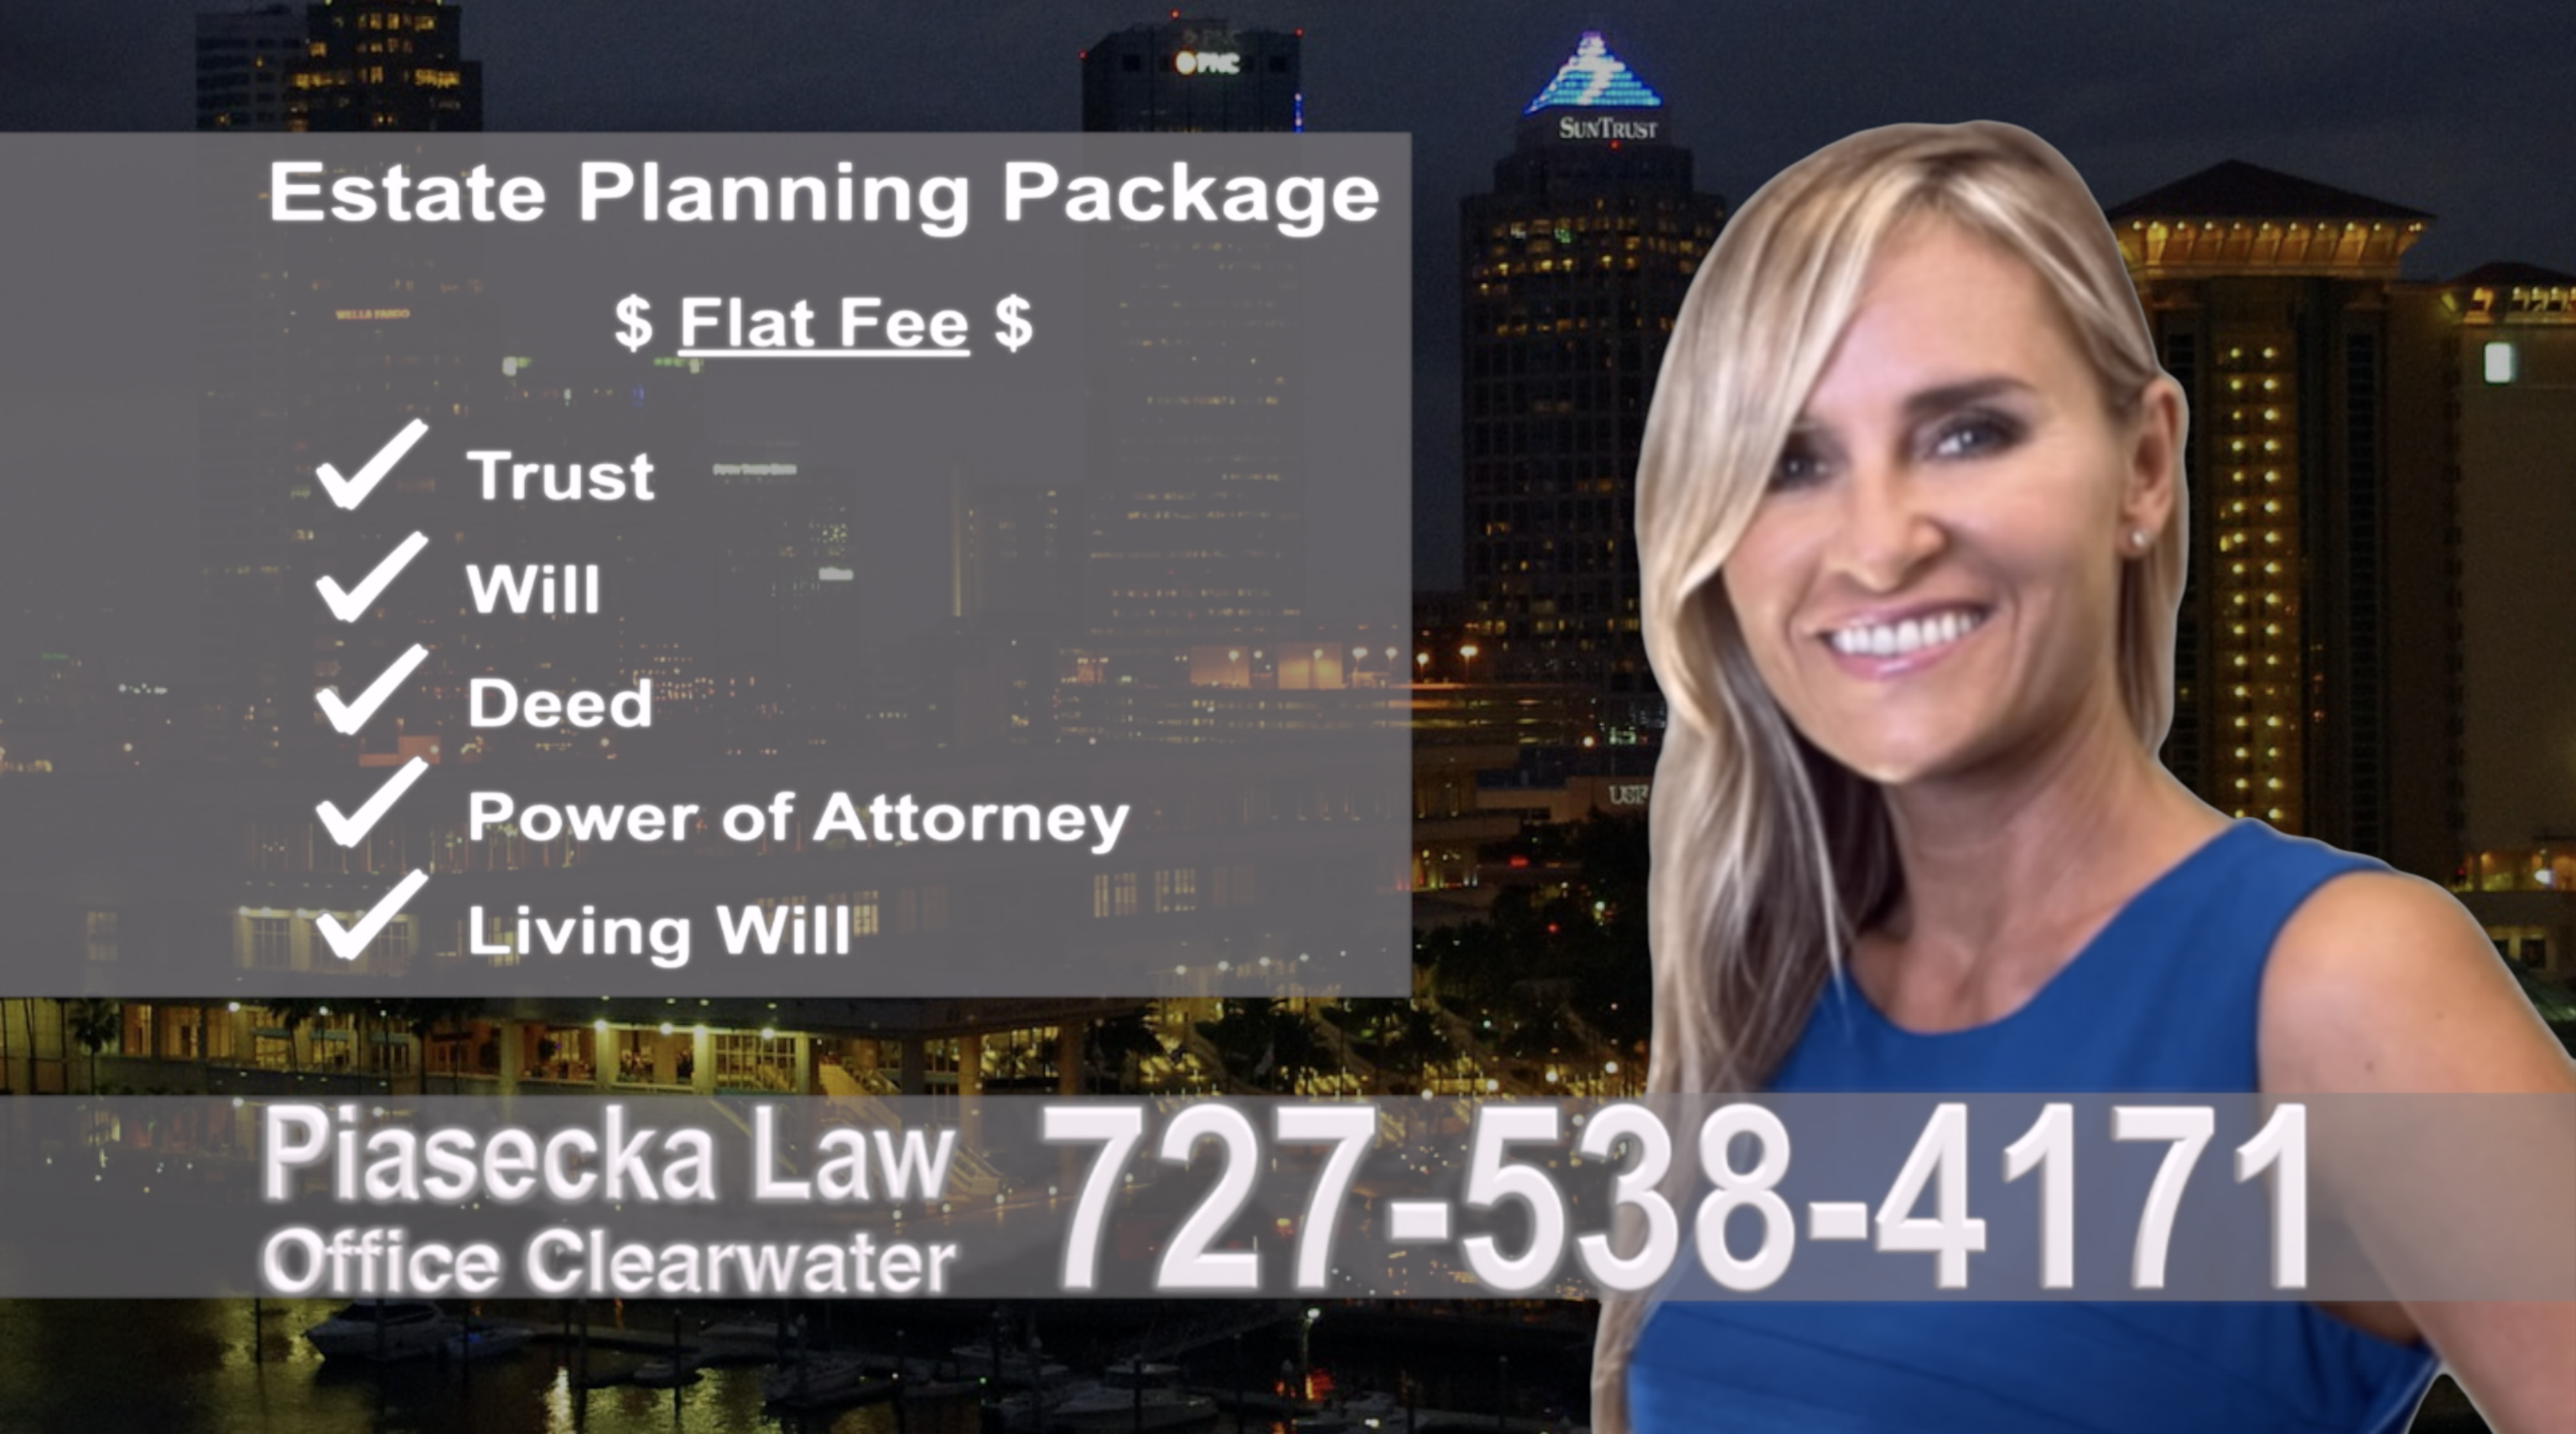 Safety Harbor Estate Planning, Wills, Trusts, Flat fee, Attorney, Lawyer, Clearwater, Florida, Agnieszka Piasecka, Aga Piasecka, Probate, Power of Attorney